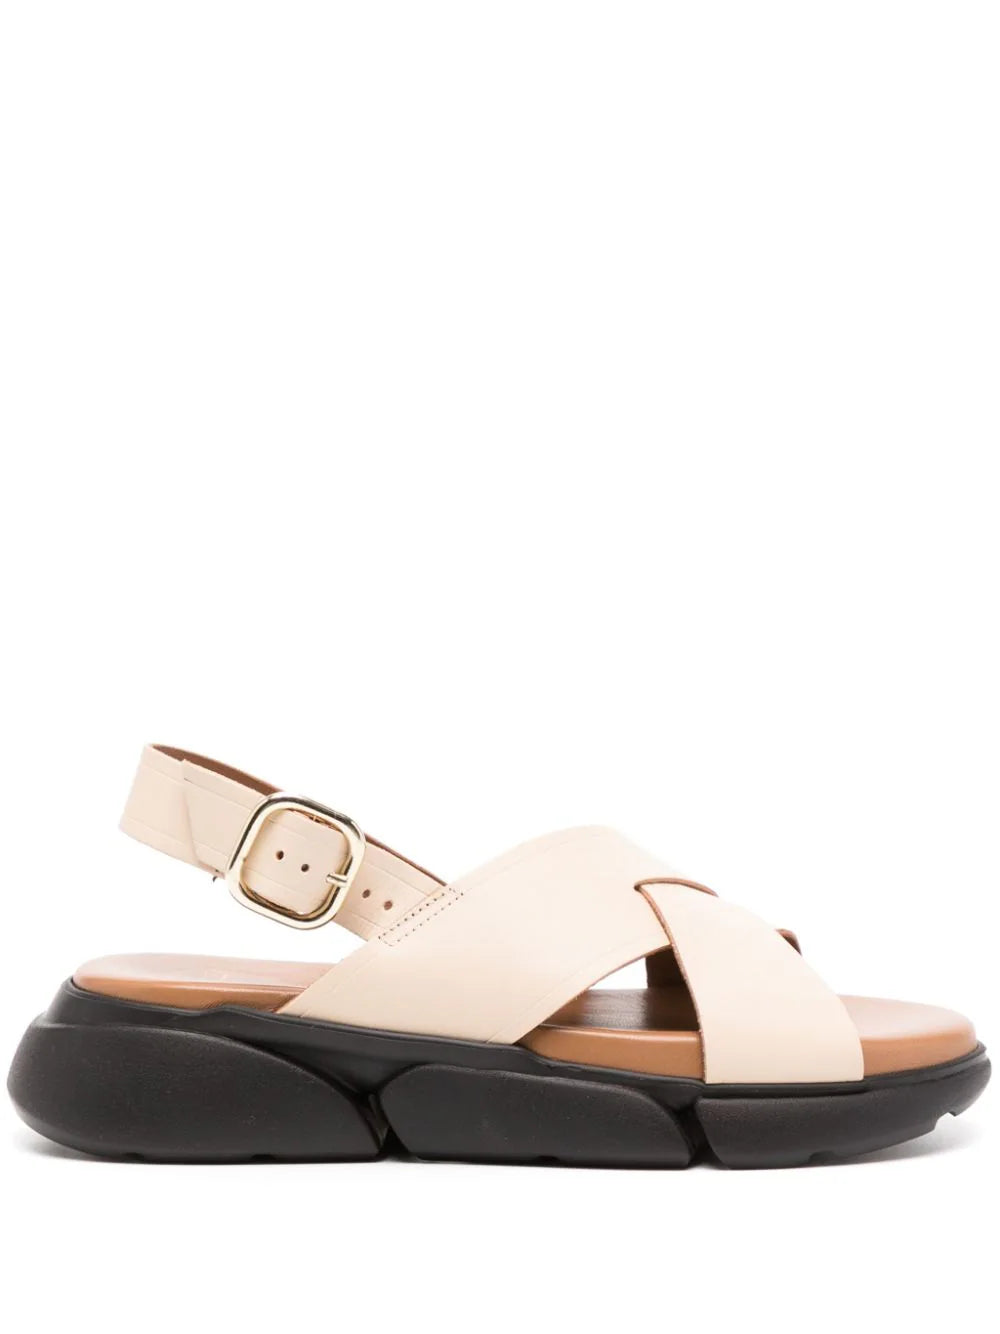 Barisci Chunky Leather Sandals in Limestone